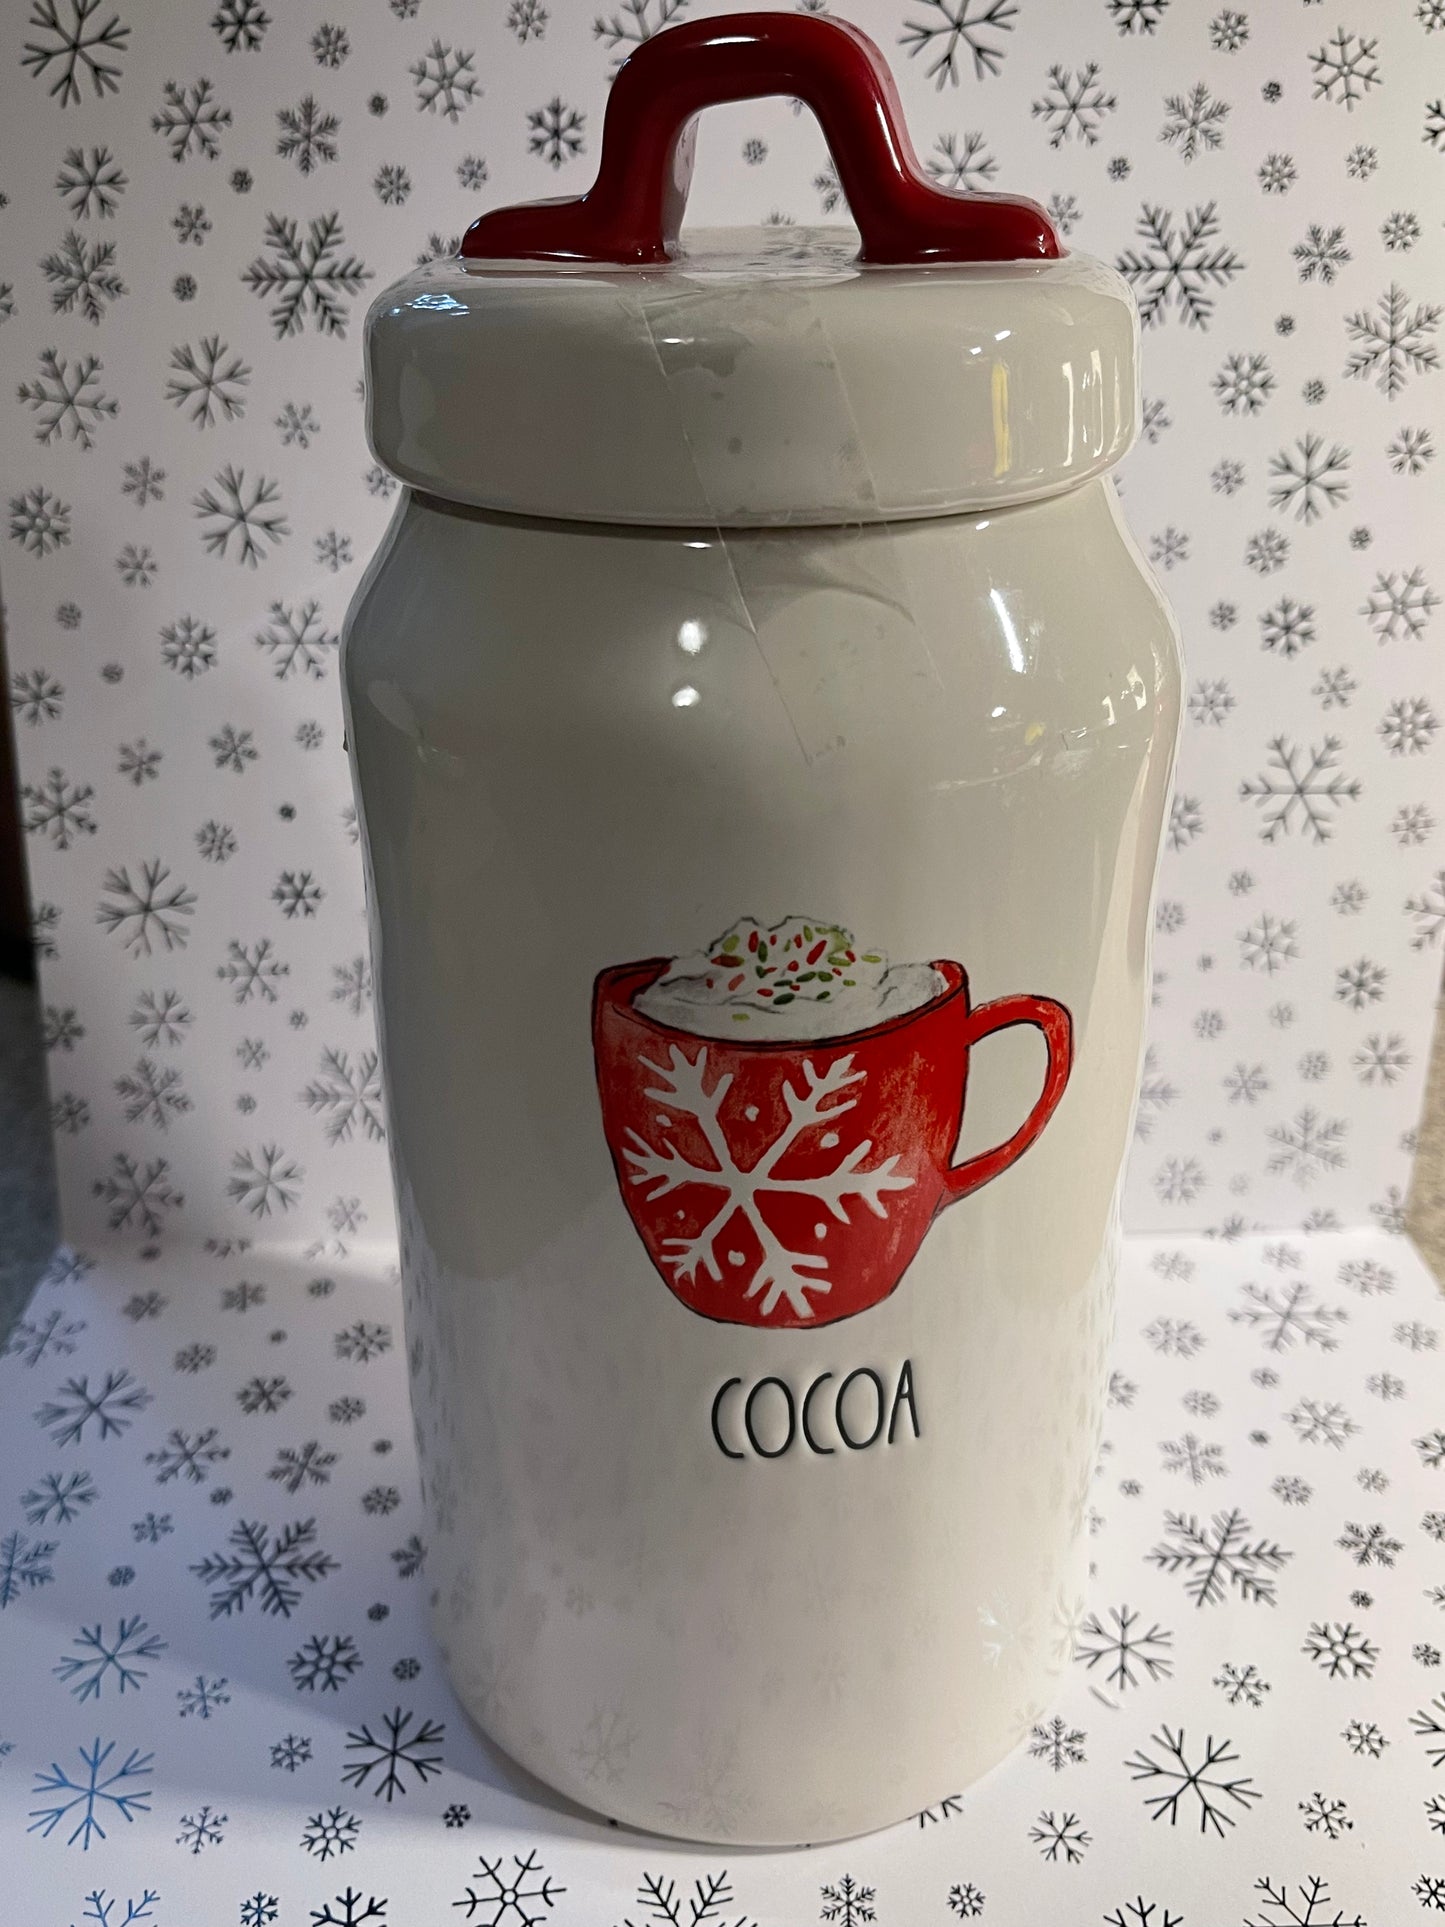 Rae Dunn Cocoa Canister White with Red Cocoa Cup 